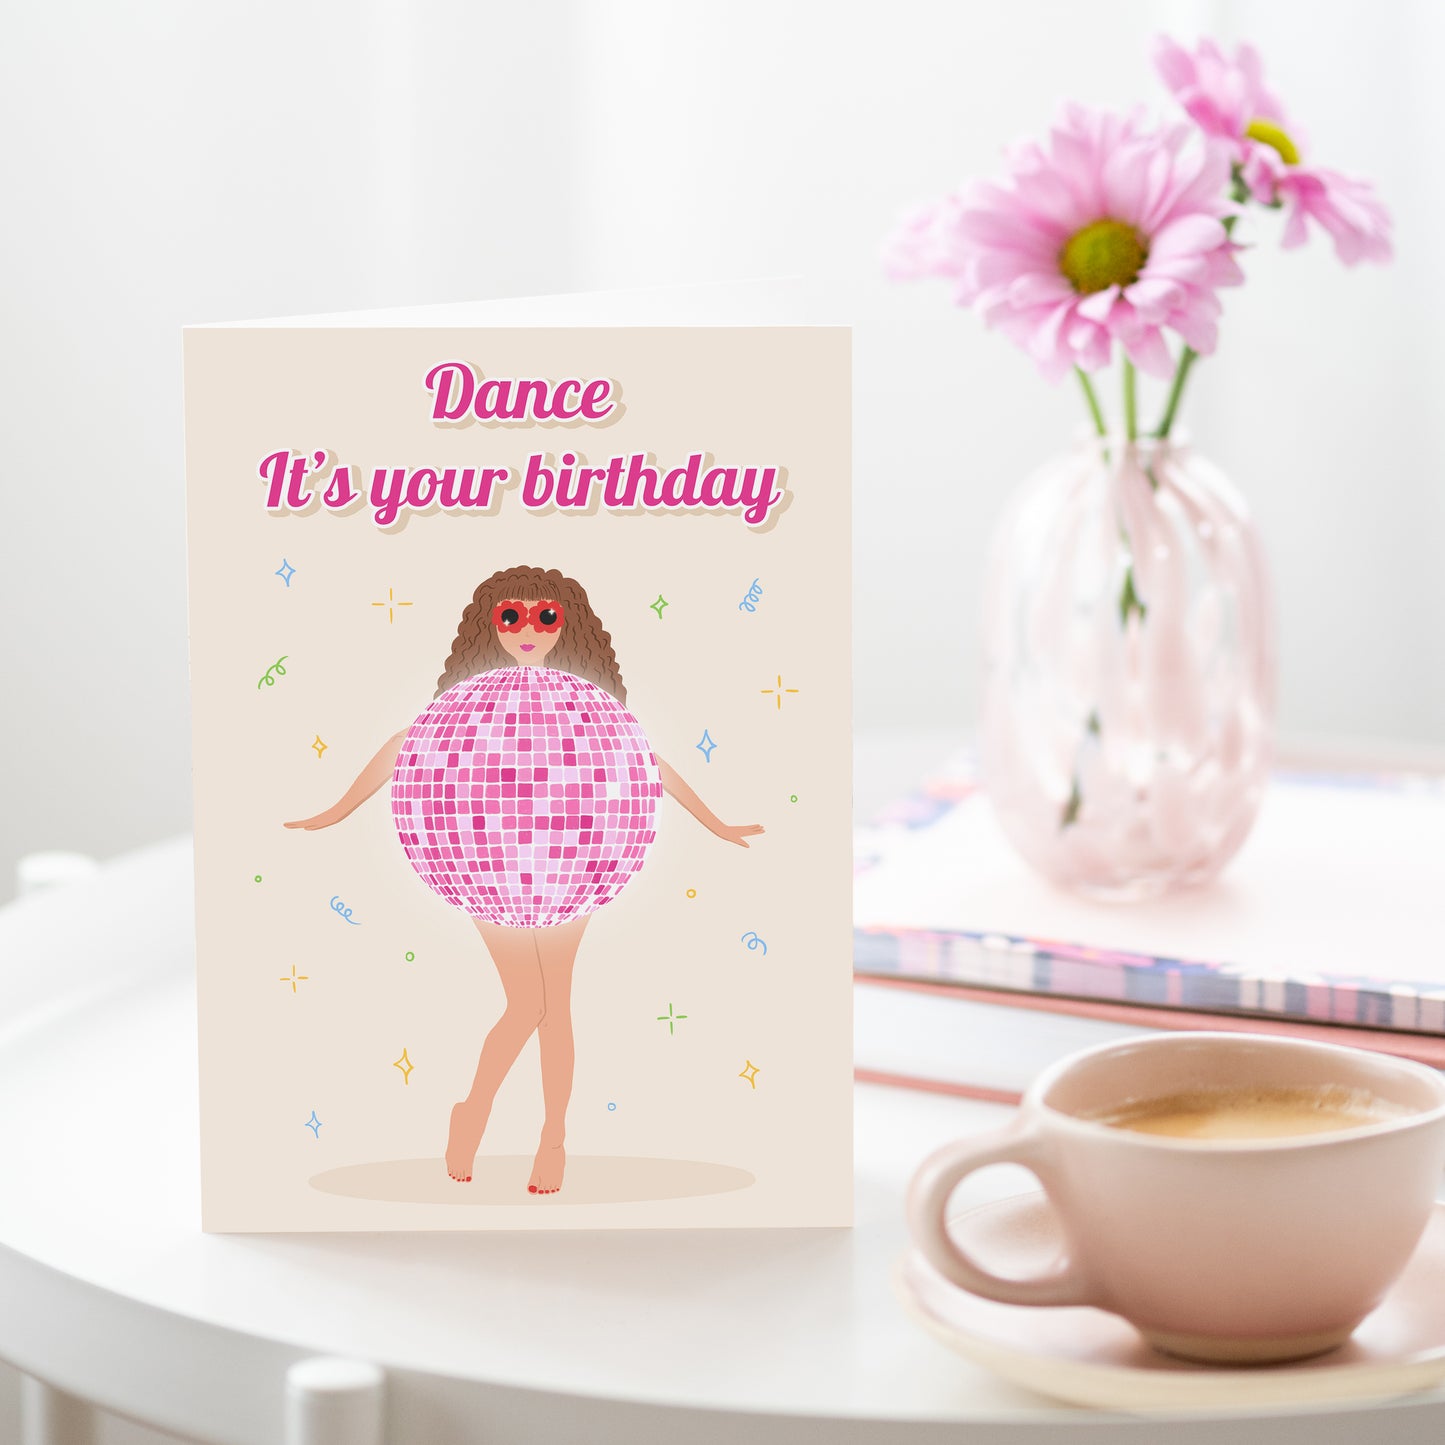 Dance It's Your Birthday | Birthday Card For Her | Disco Ball